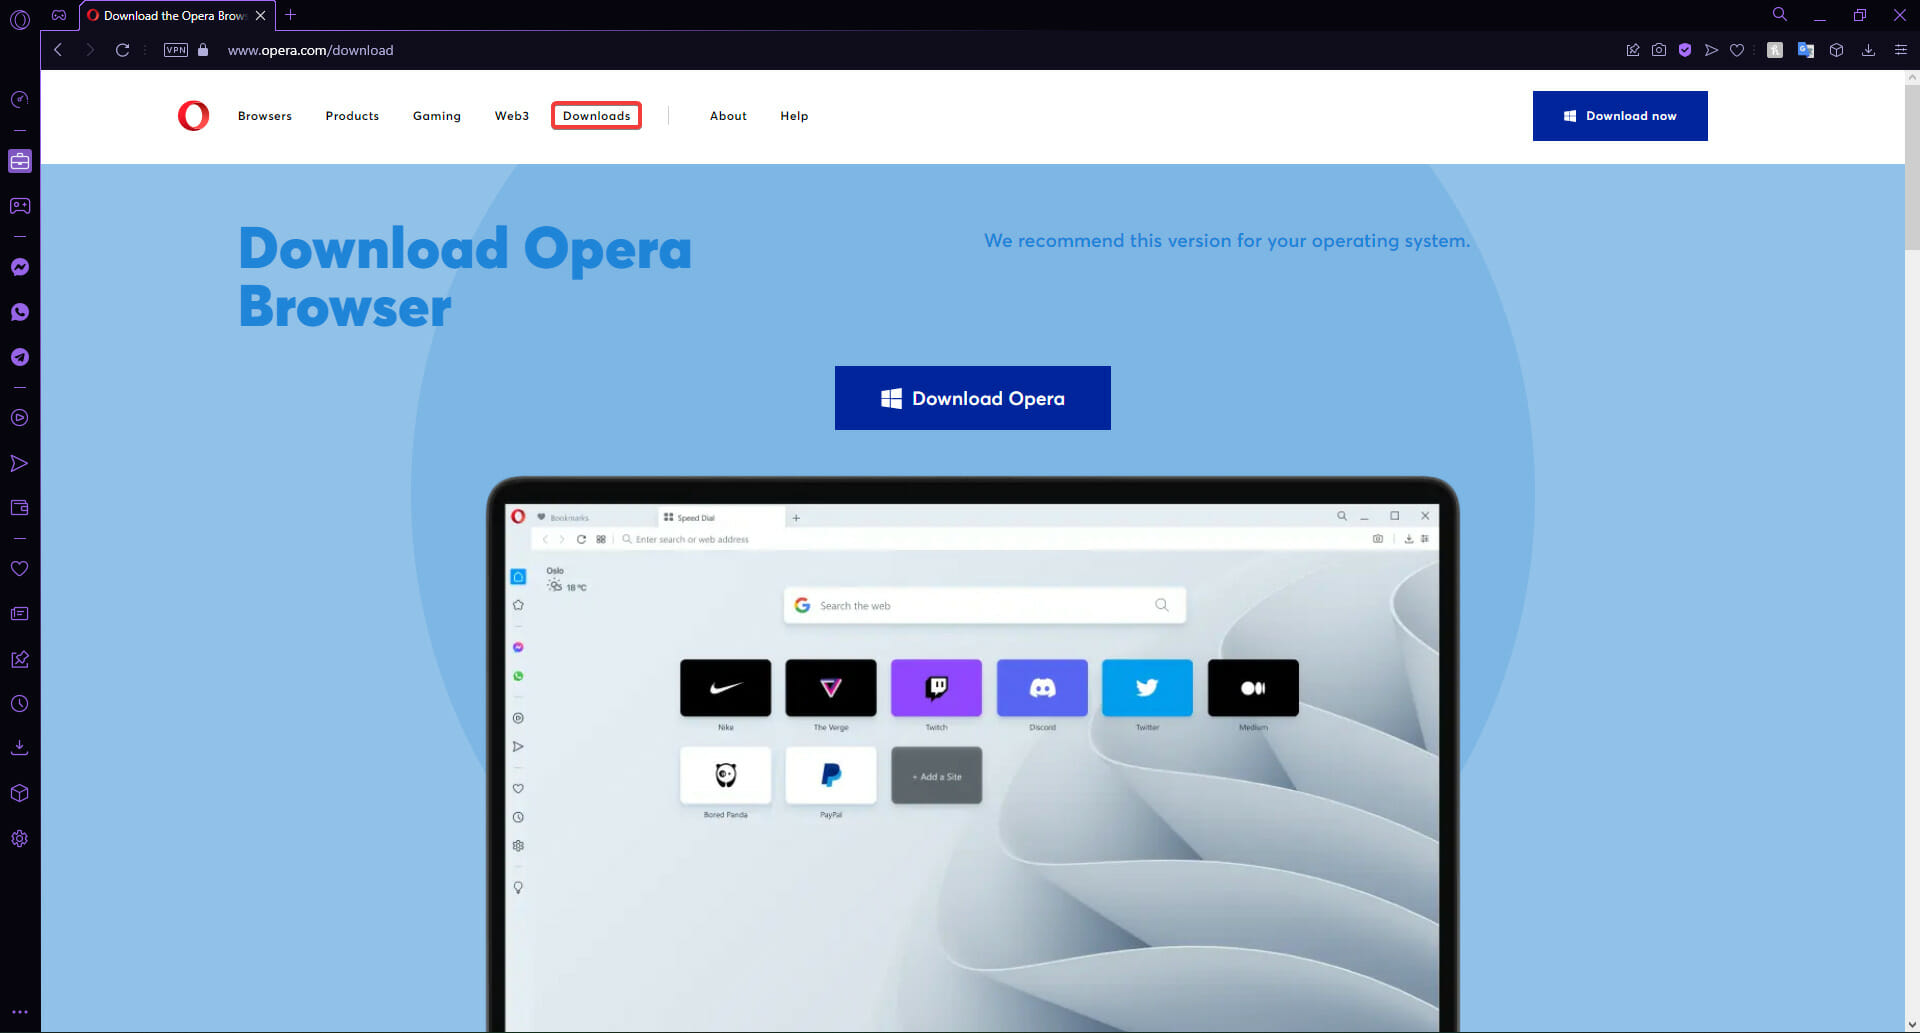 Click on downloads in the Opera homepage.